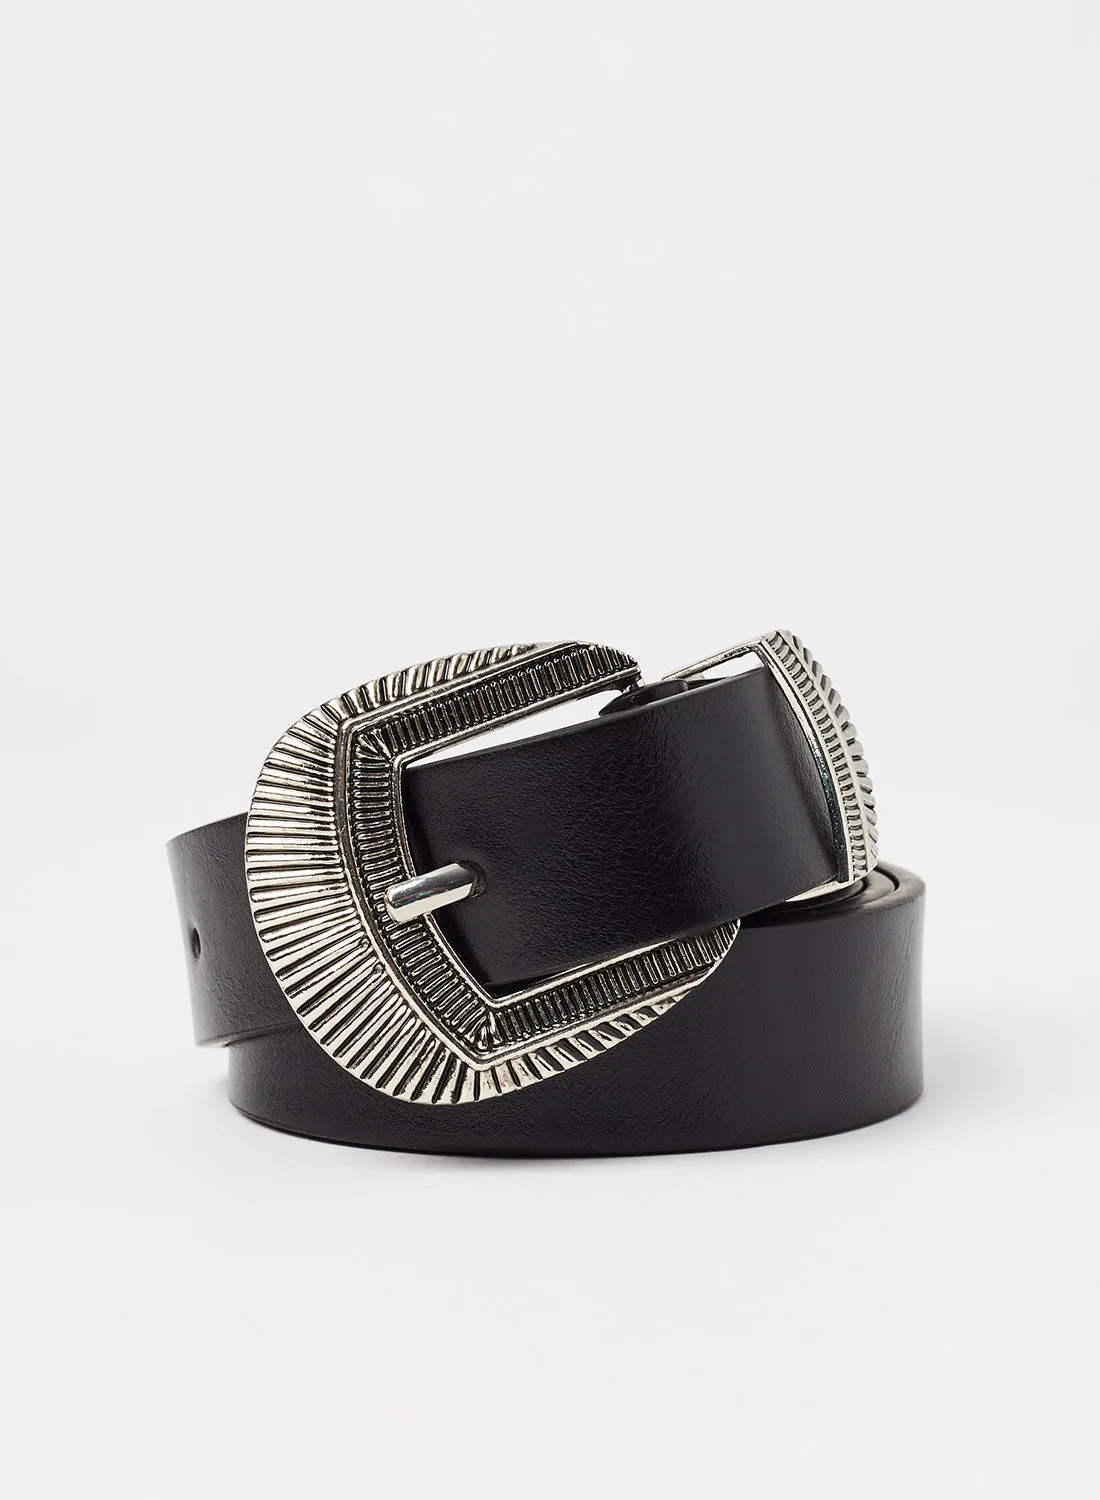 Reserved Textured Buckle Faux Leather Belt Black